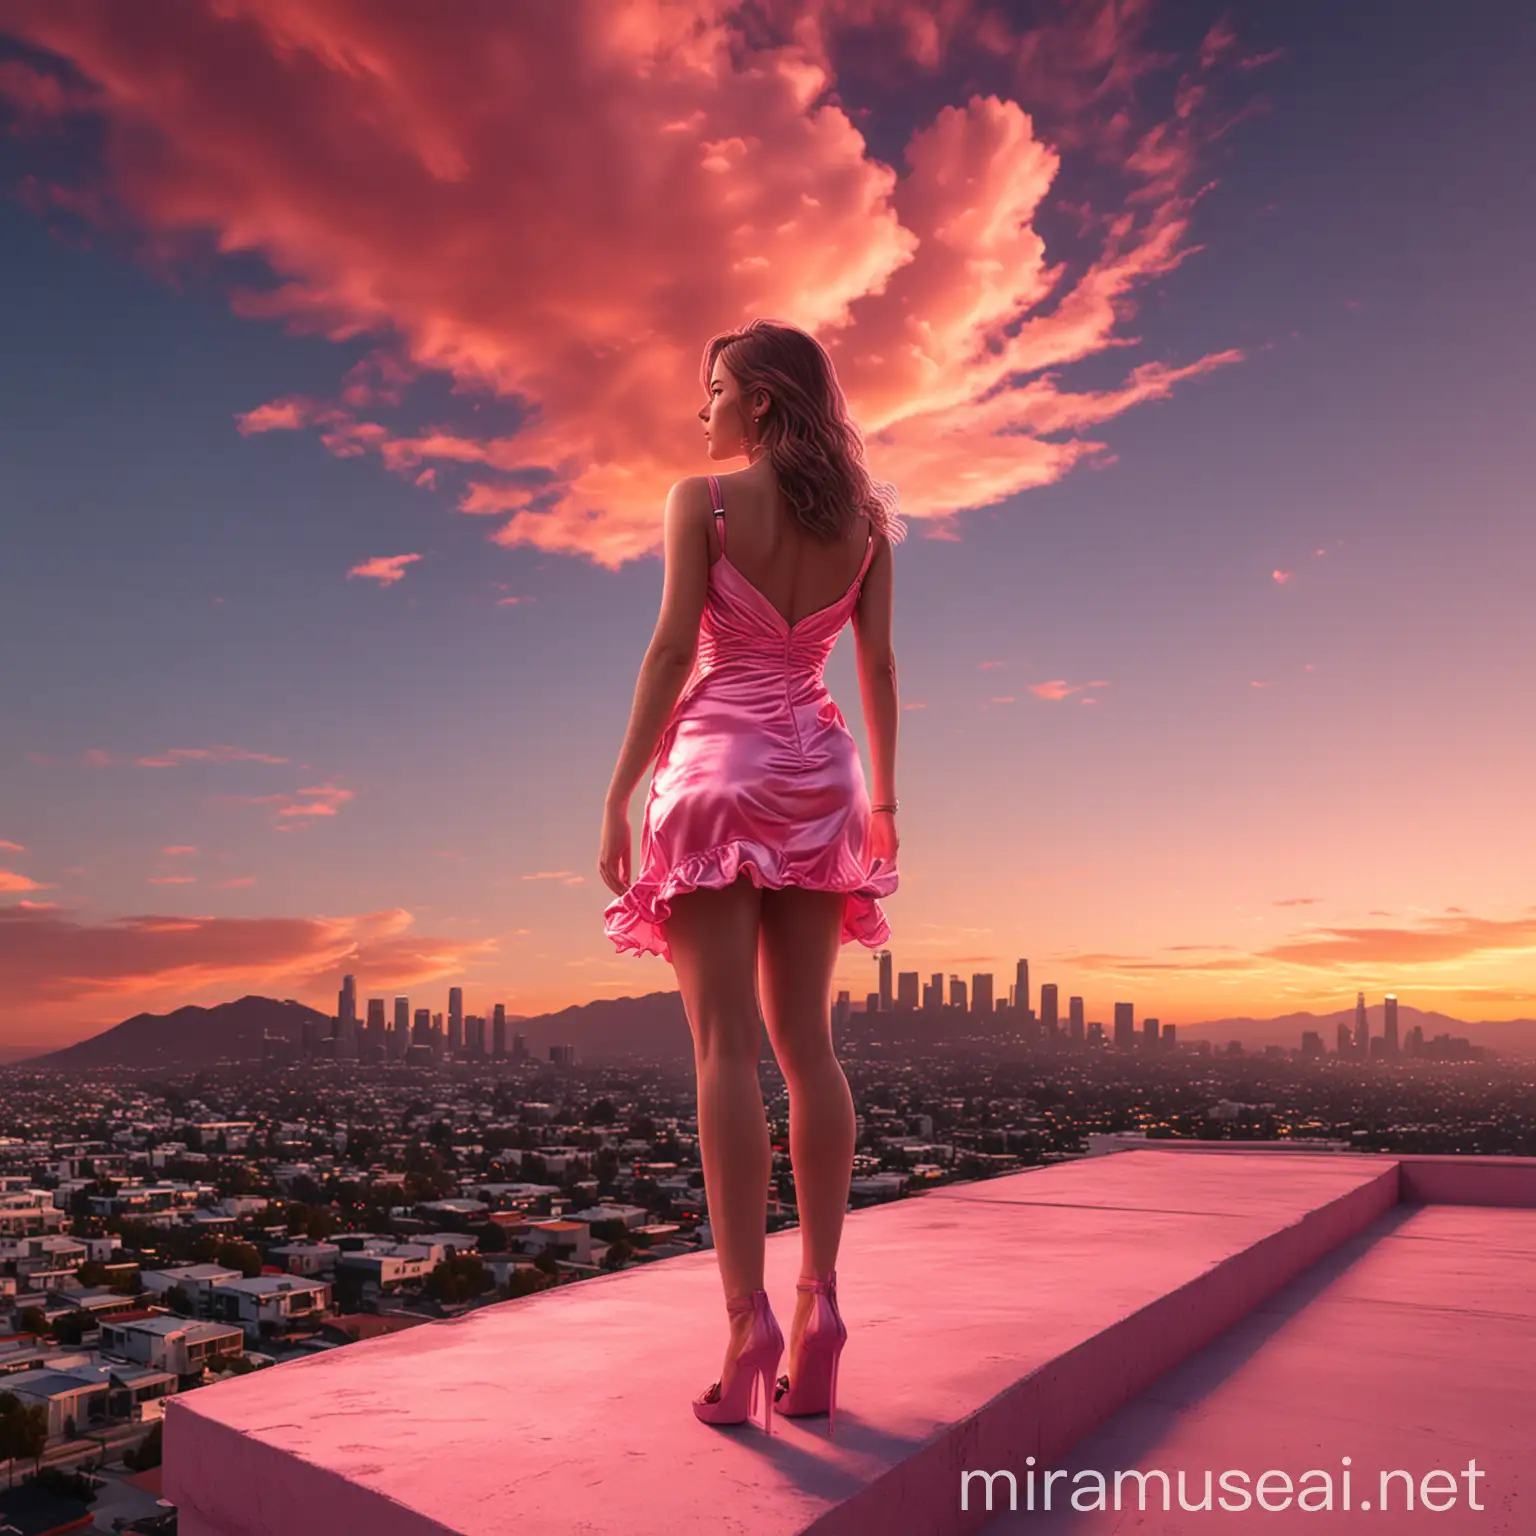 Woman in Pink Dress on Los Angeles Rooftop Sunset